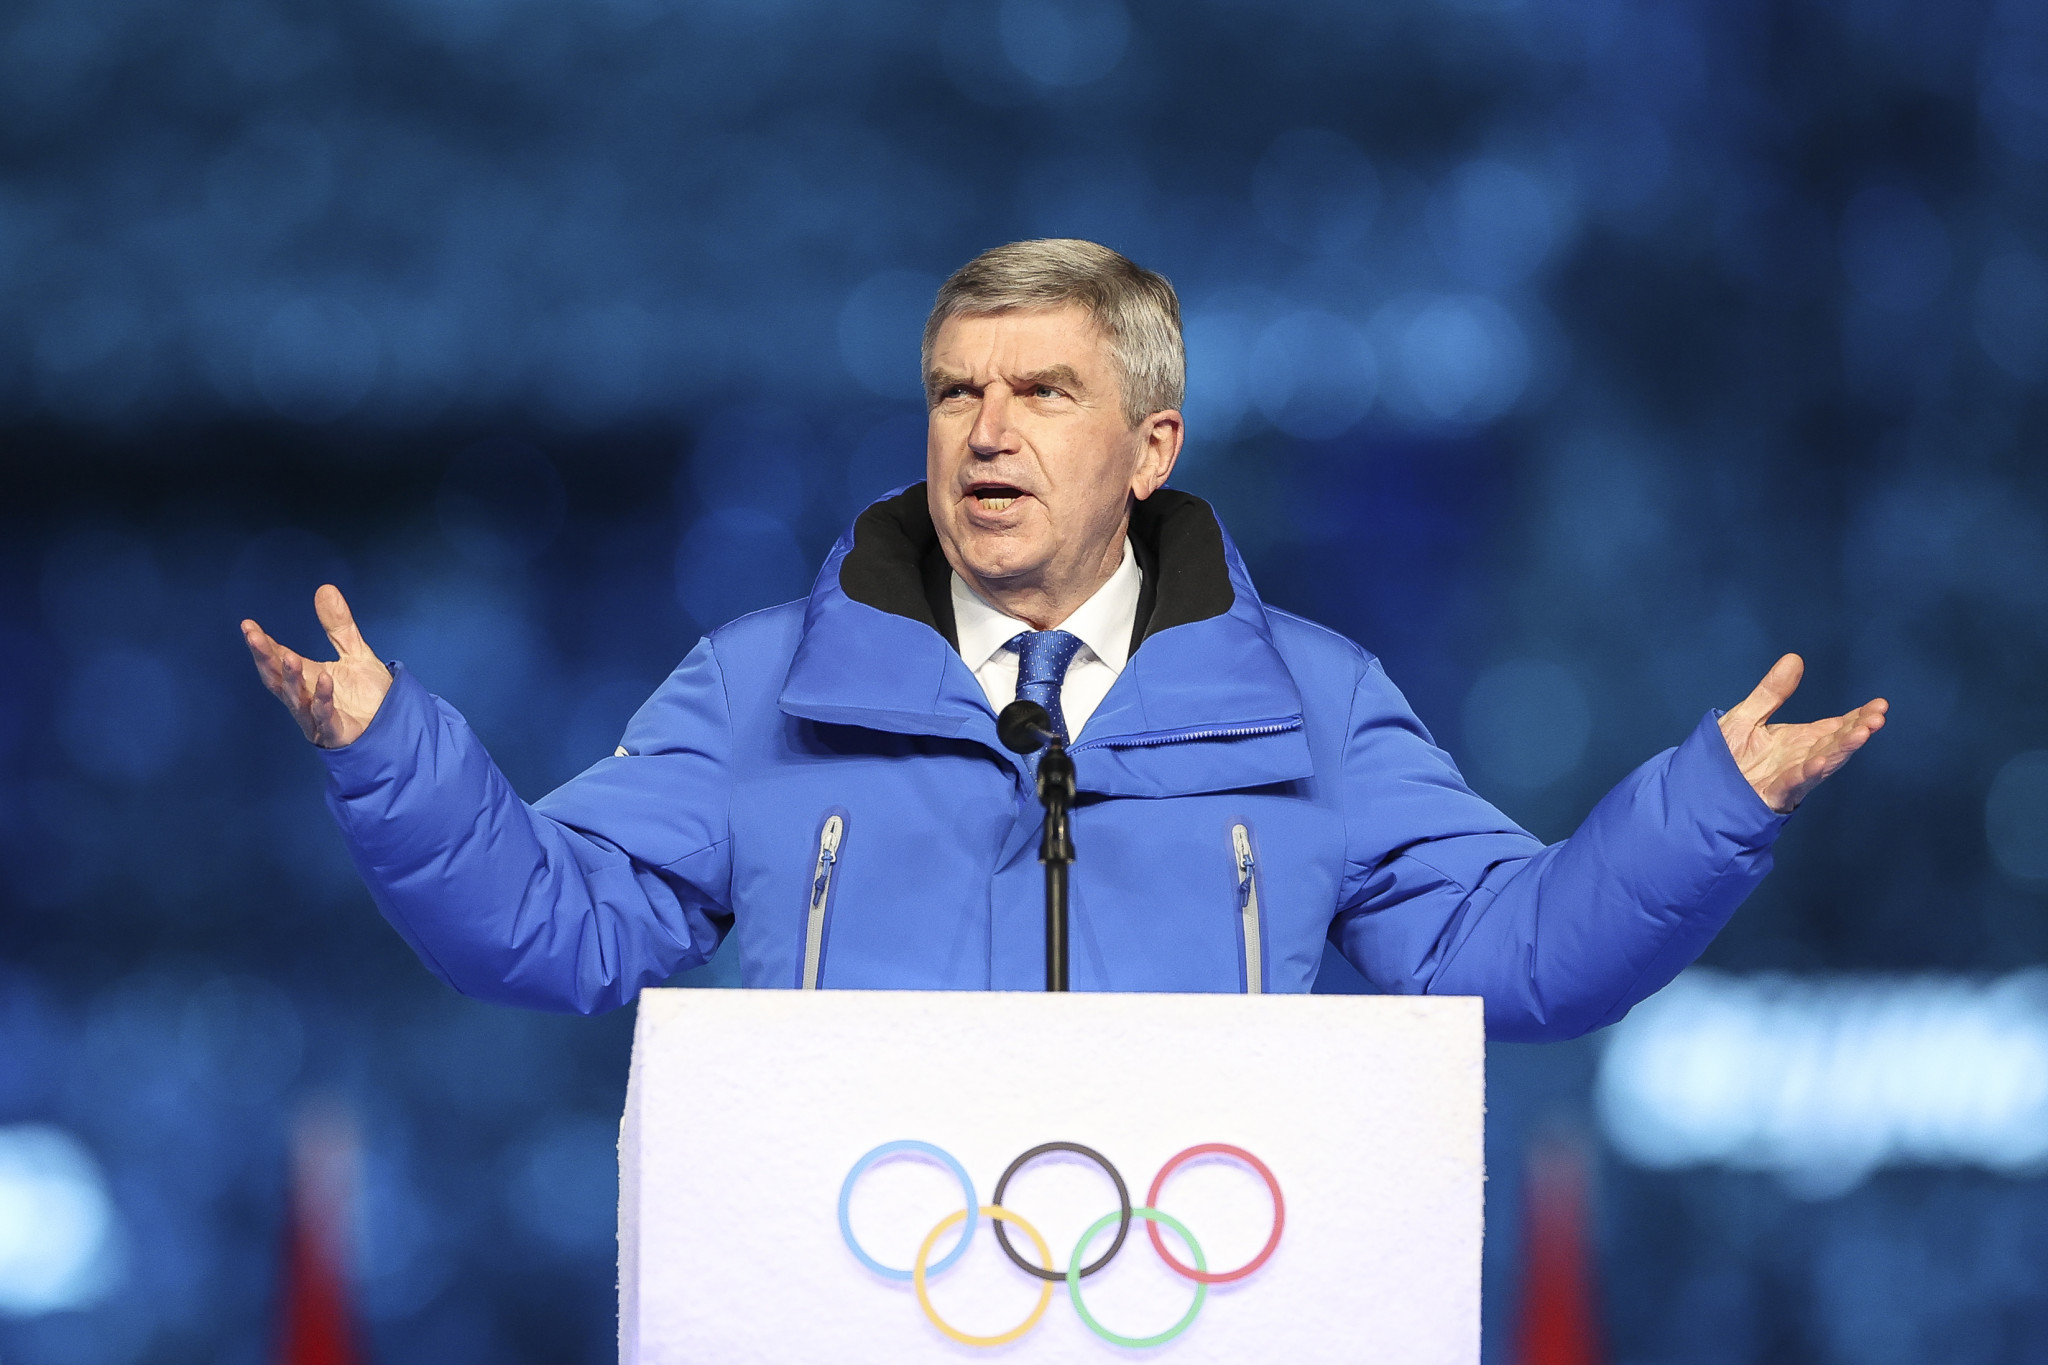 IOC President Thomas Bach claimed the support for Ukrainian and Afghan athletes showed 